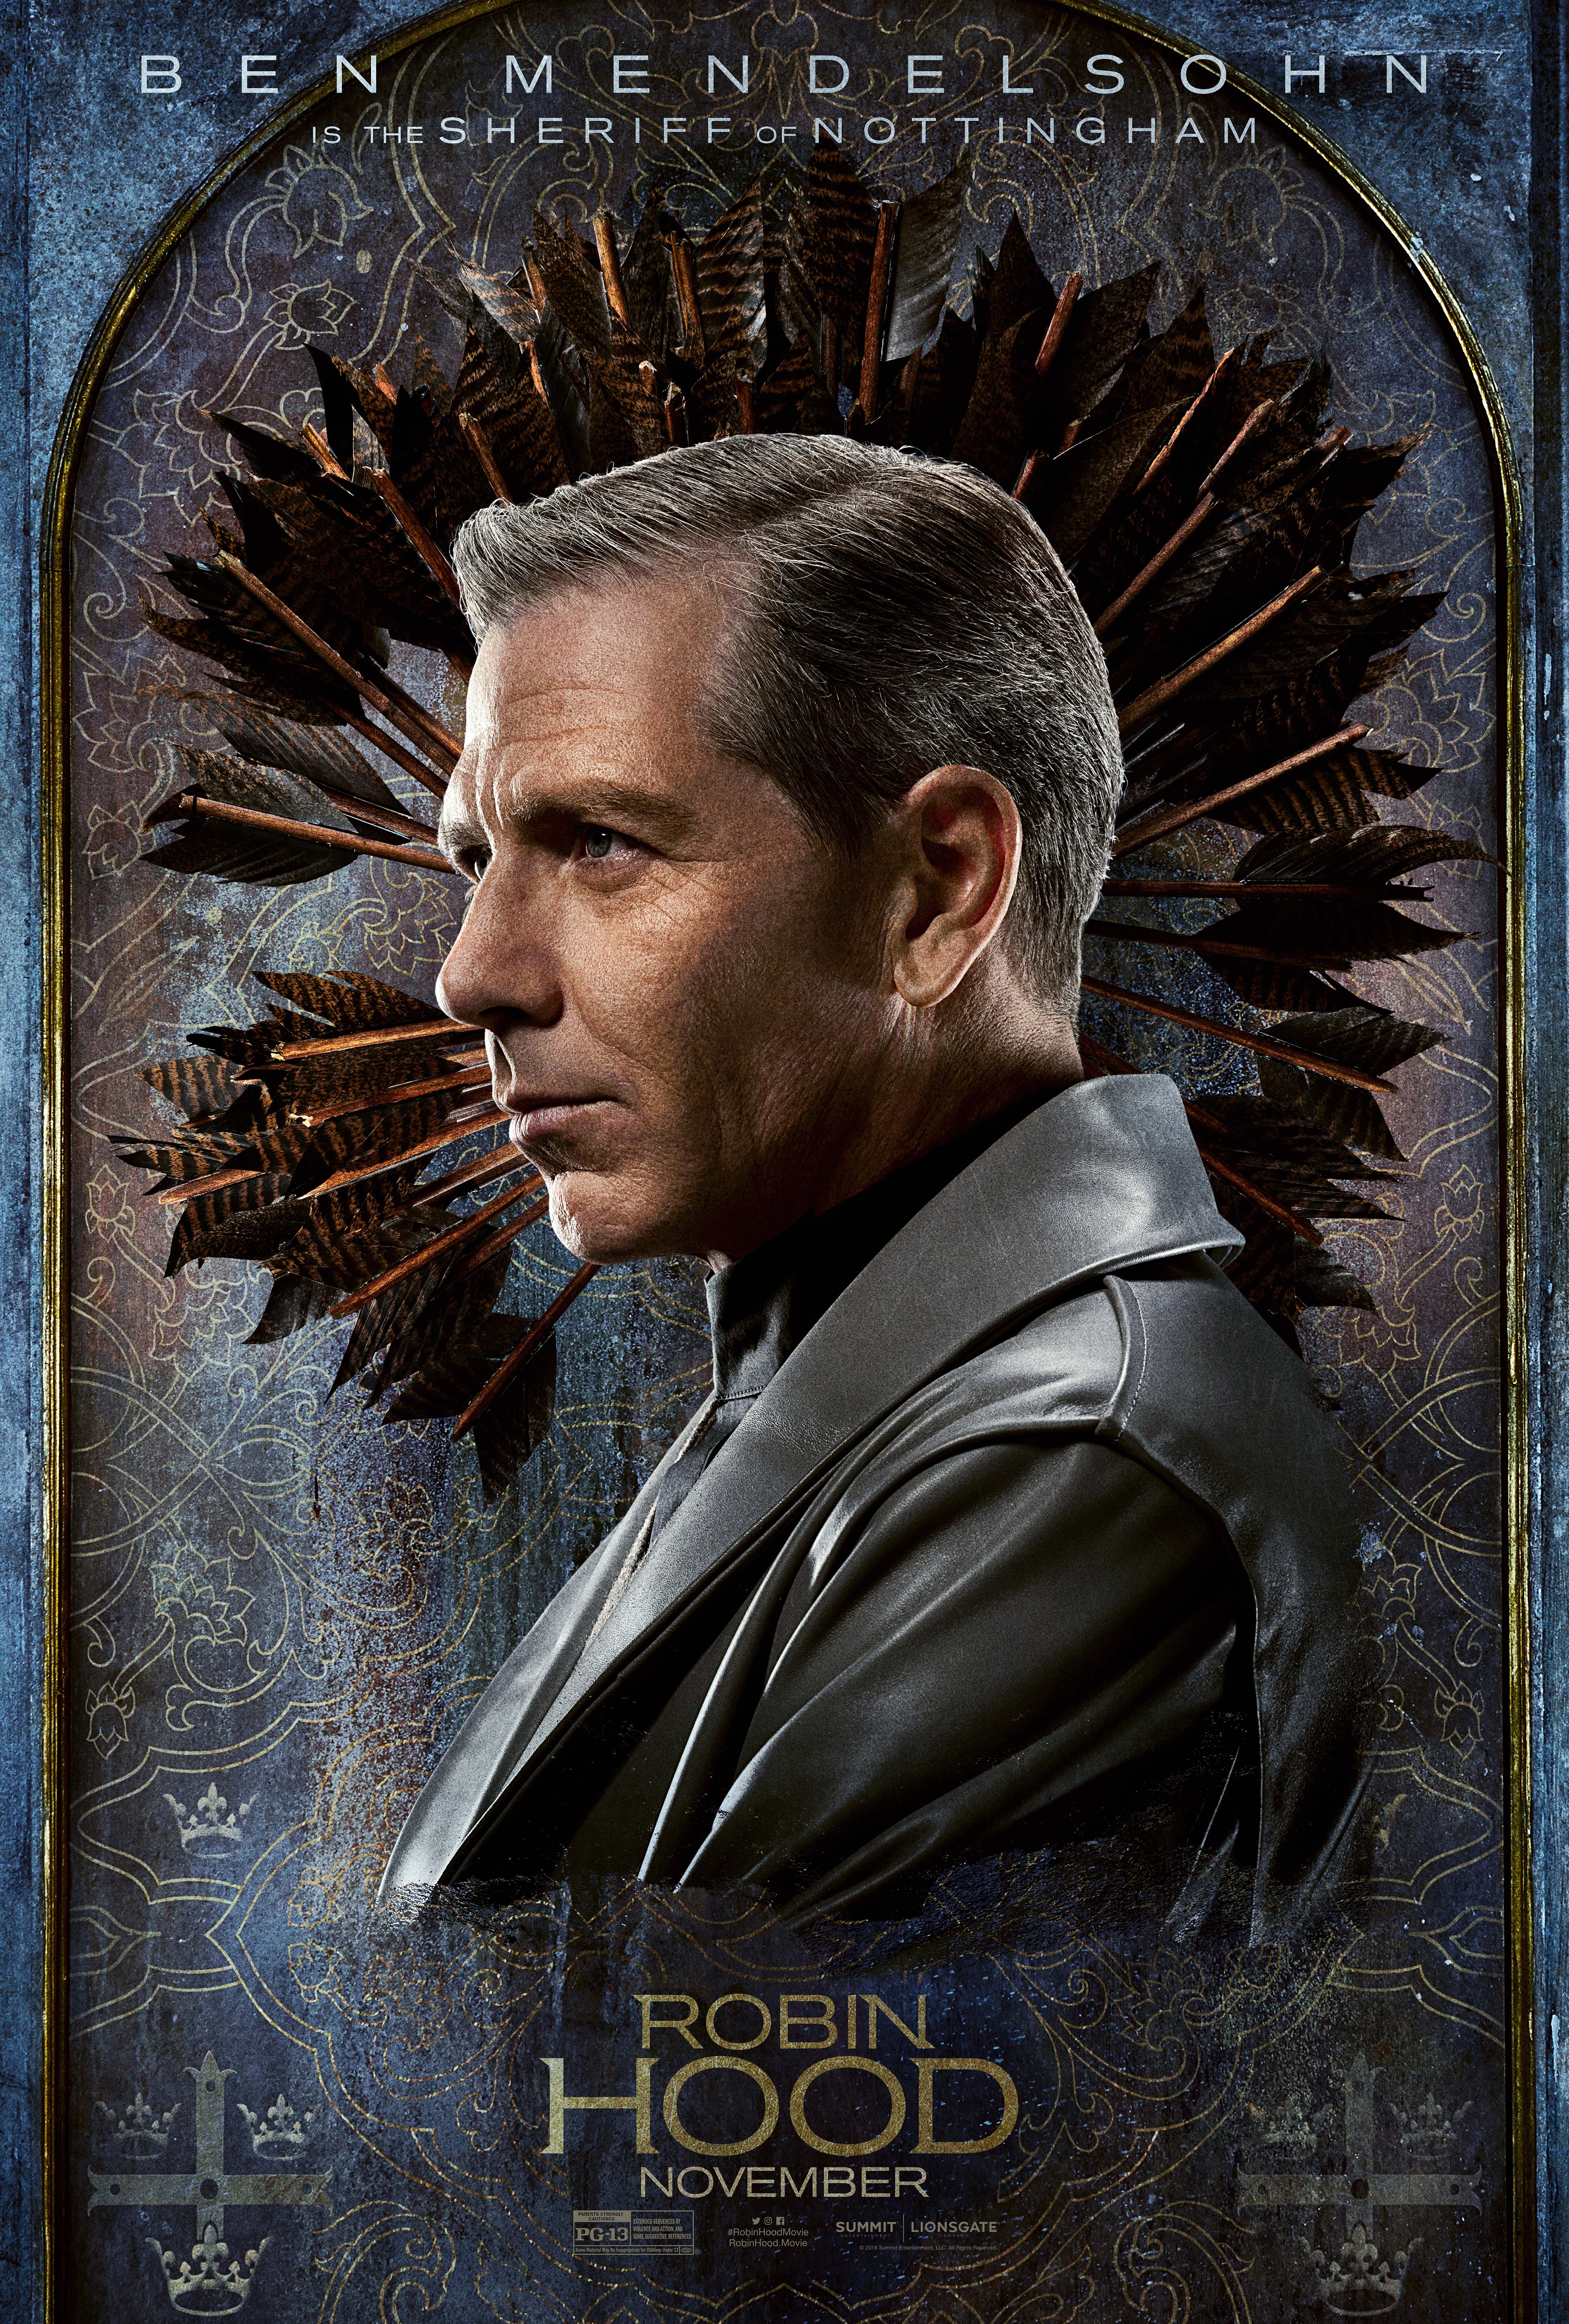 Sheriff of Notthingham character poster (Lionsgate)